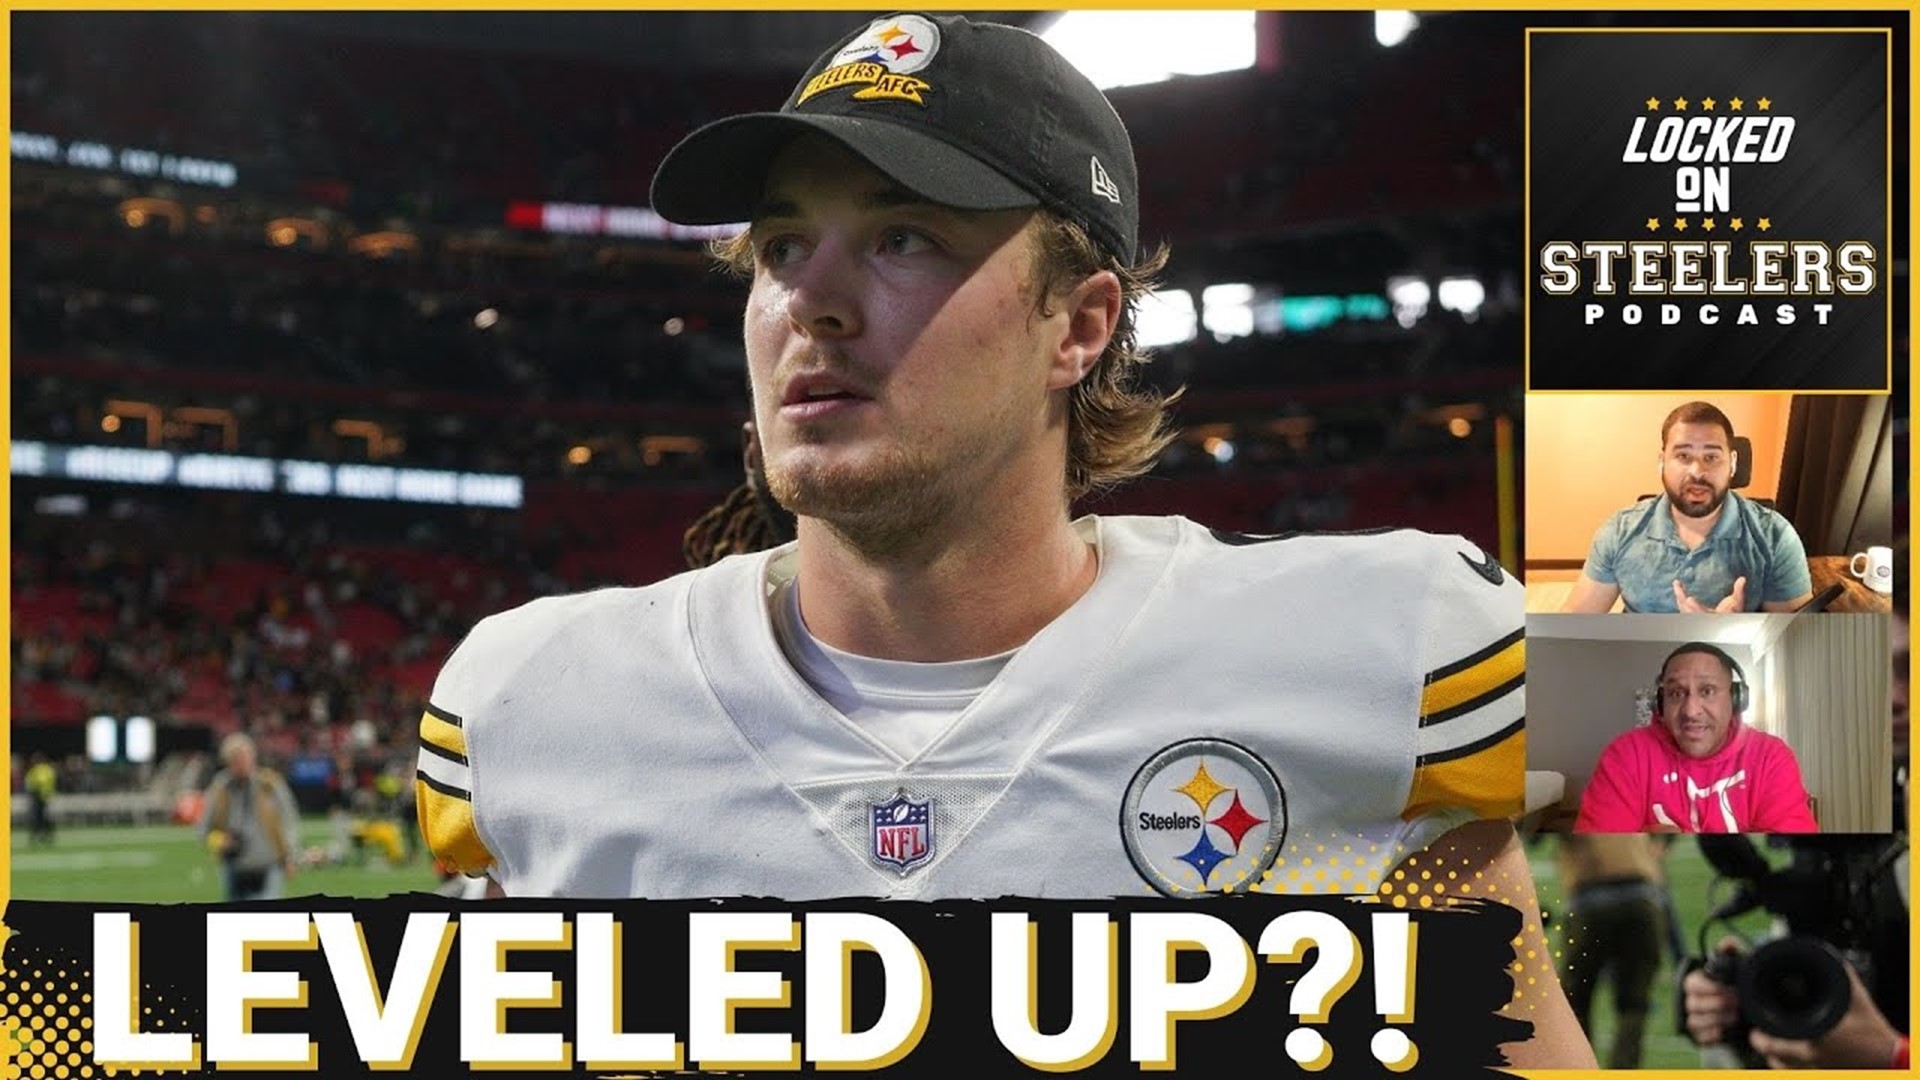 The Pittsburgh Steelers have seen their rookie quarterback Kenny Pickett playing better football of late to help them win 3 of the last 4 games.